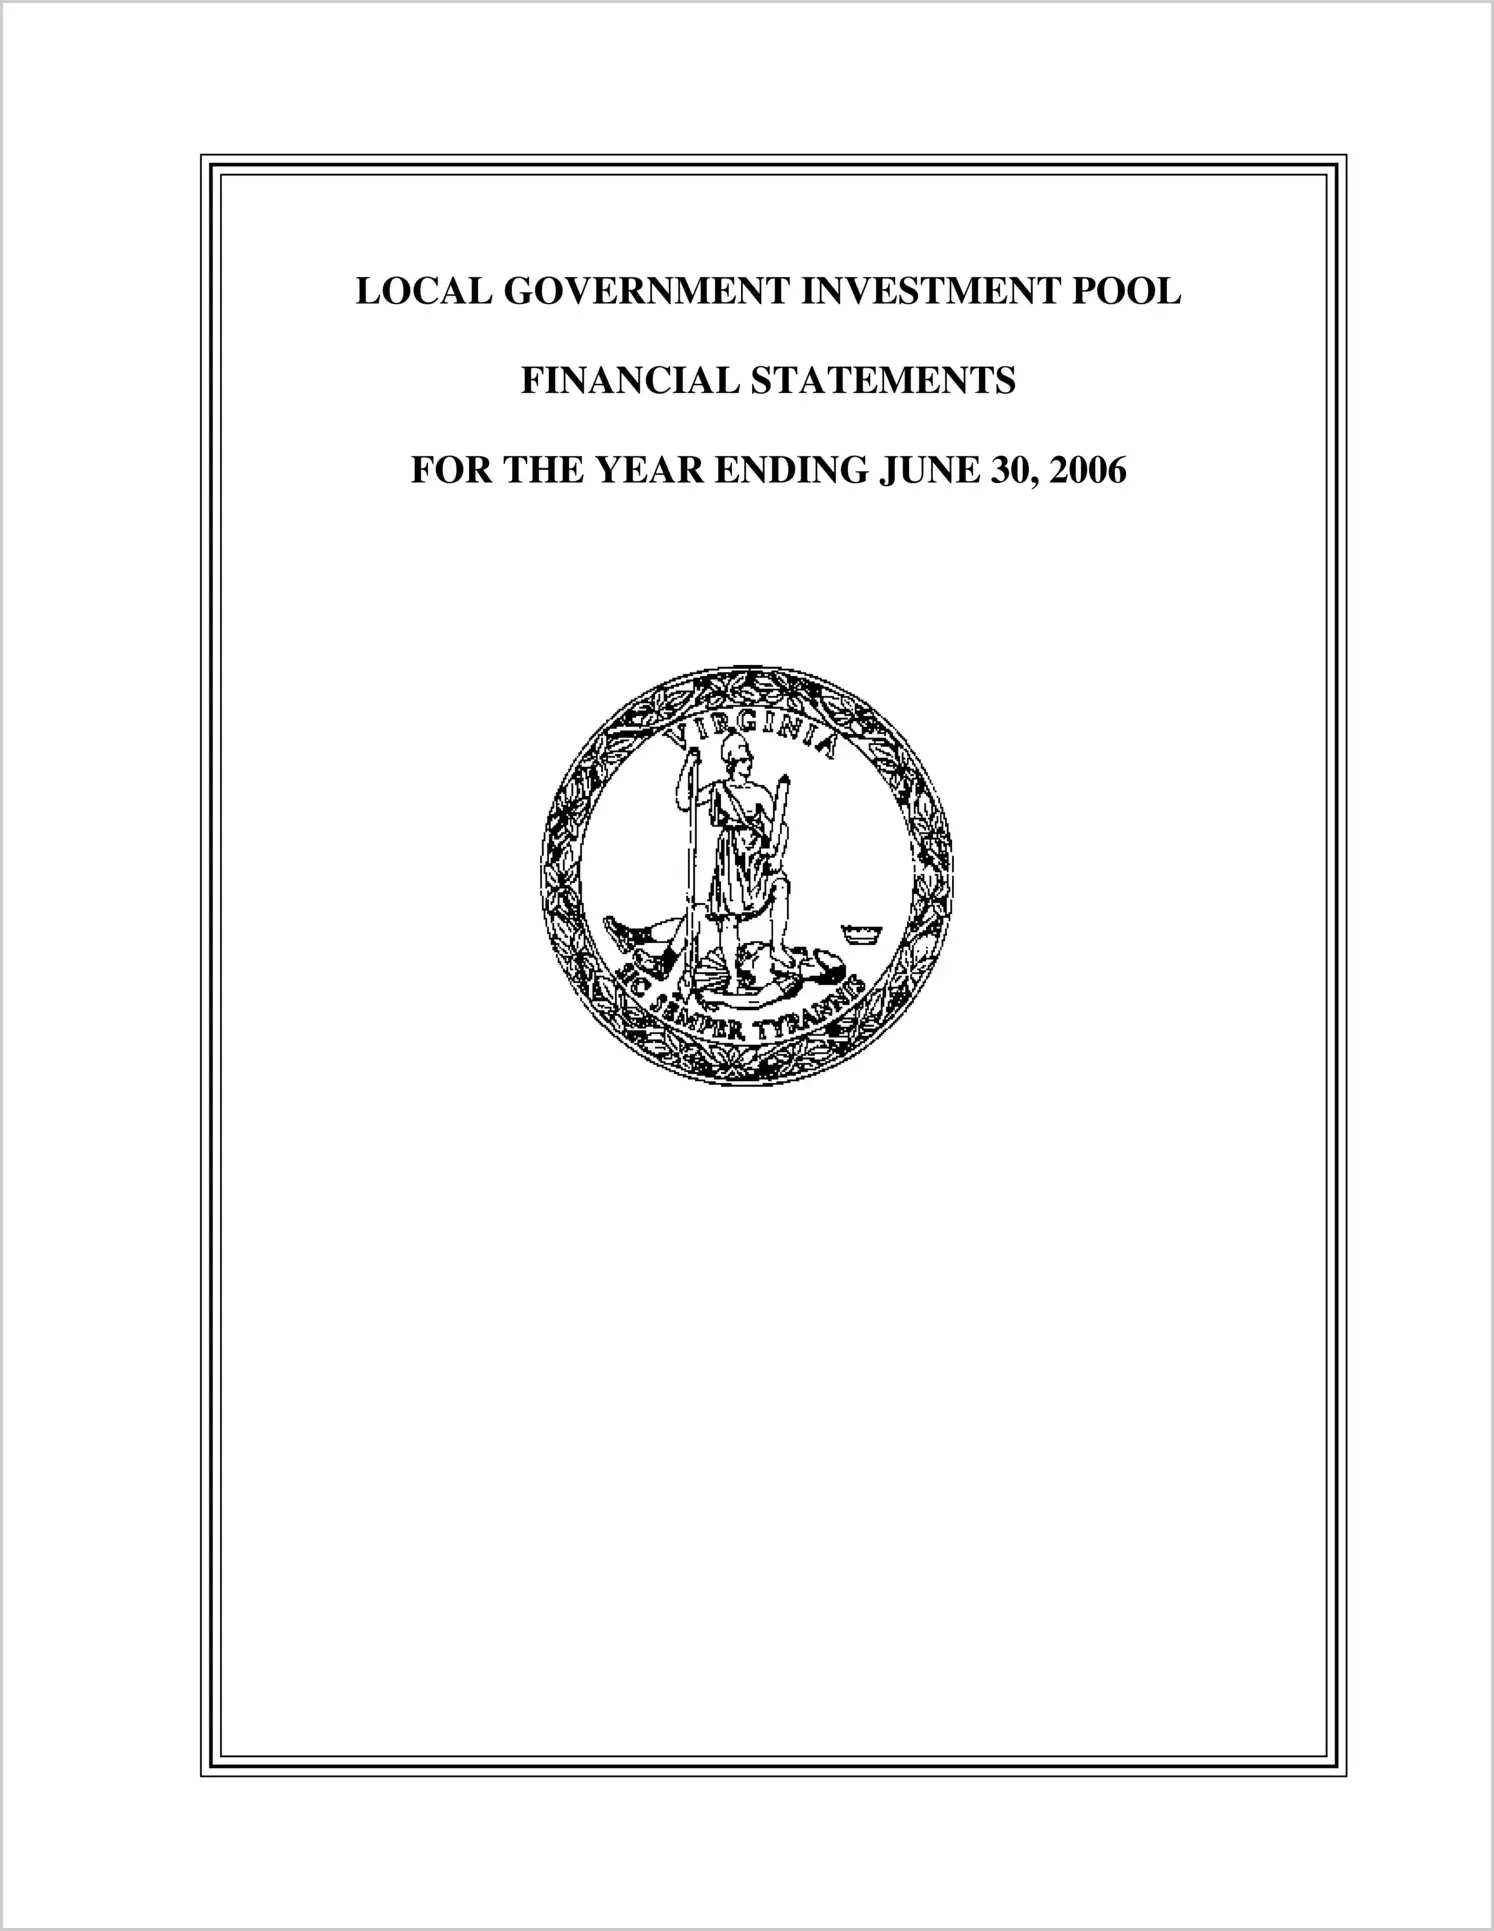 Local Government Investment Pool Financial Statements for the year ended June 30, 2006